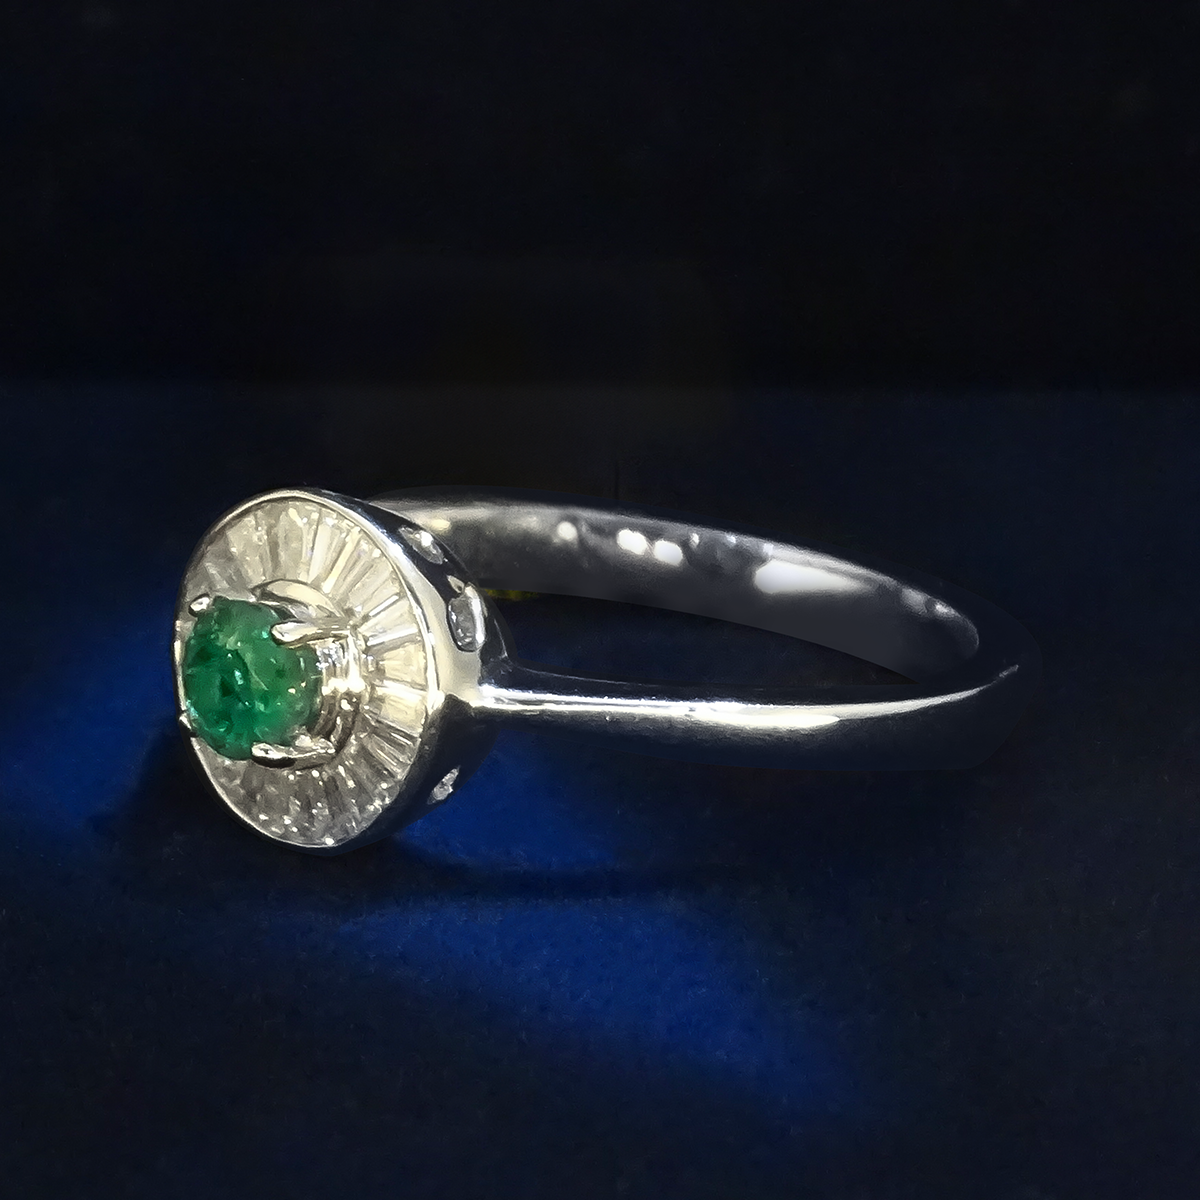 0.23ct Emerald and Diamond Baguette Halo Ring in 9ct White Gold